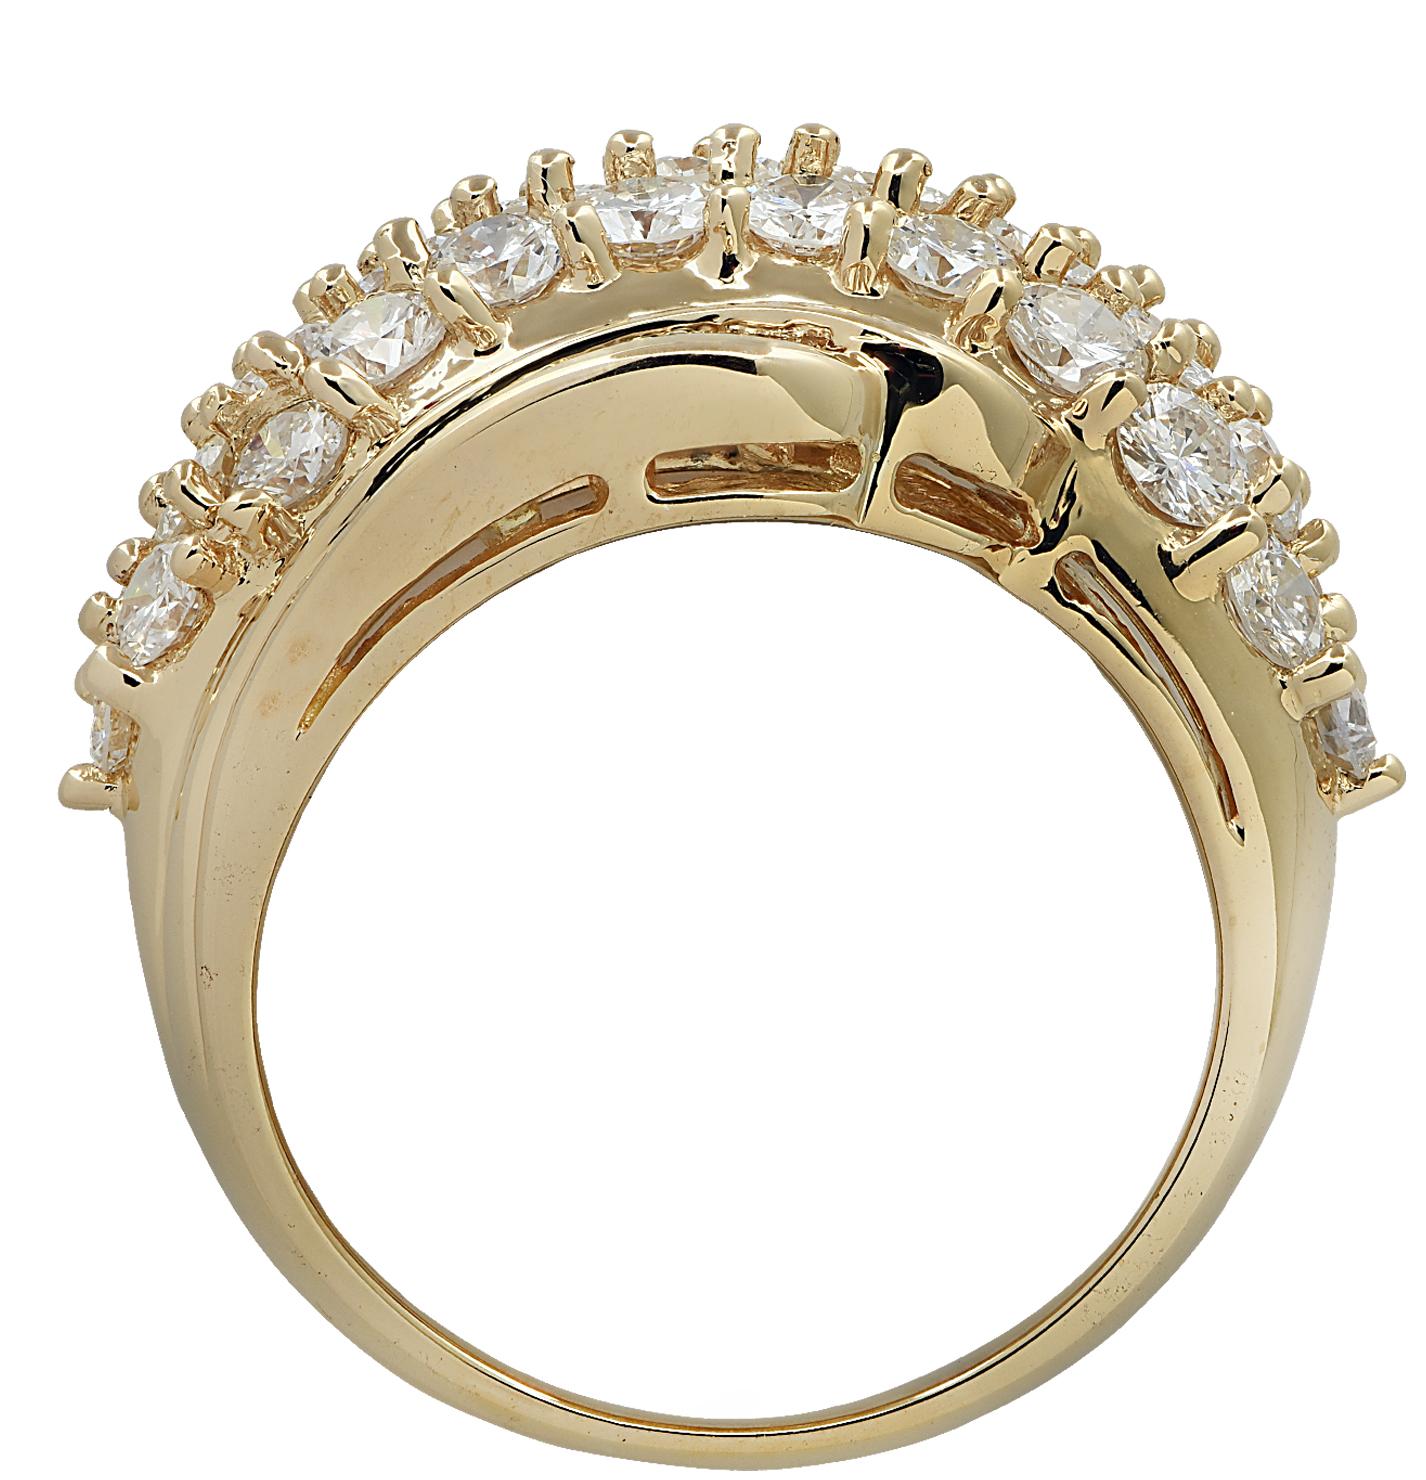 Gorgeous ring crafted in 18 karat yellow gold featuring 59 mixed round brilliant cut diamonds and baguette diamonds weighing approximately 2 carats total, F-G color, VS-SI clarity. This beautiful ring measures .5 of an inch at its widest part. It is